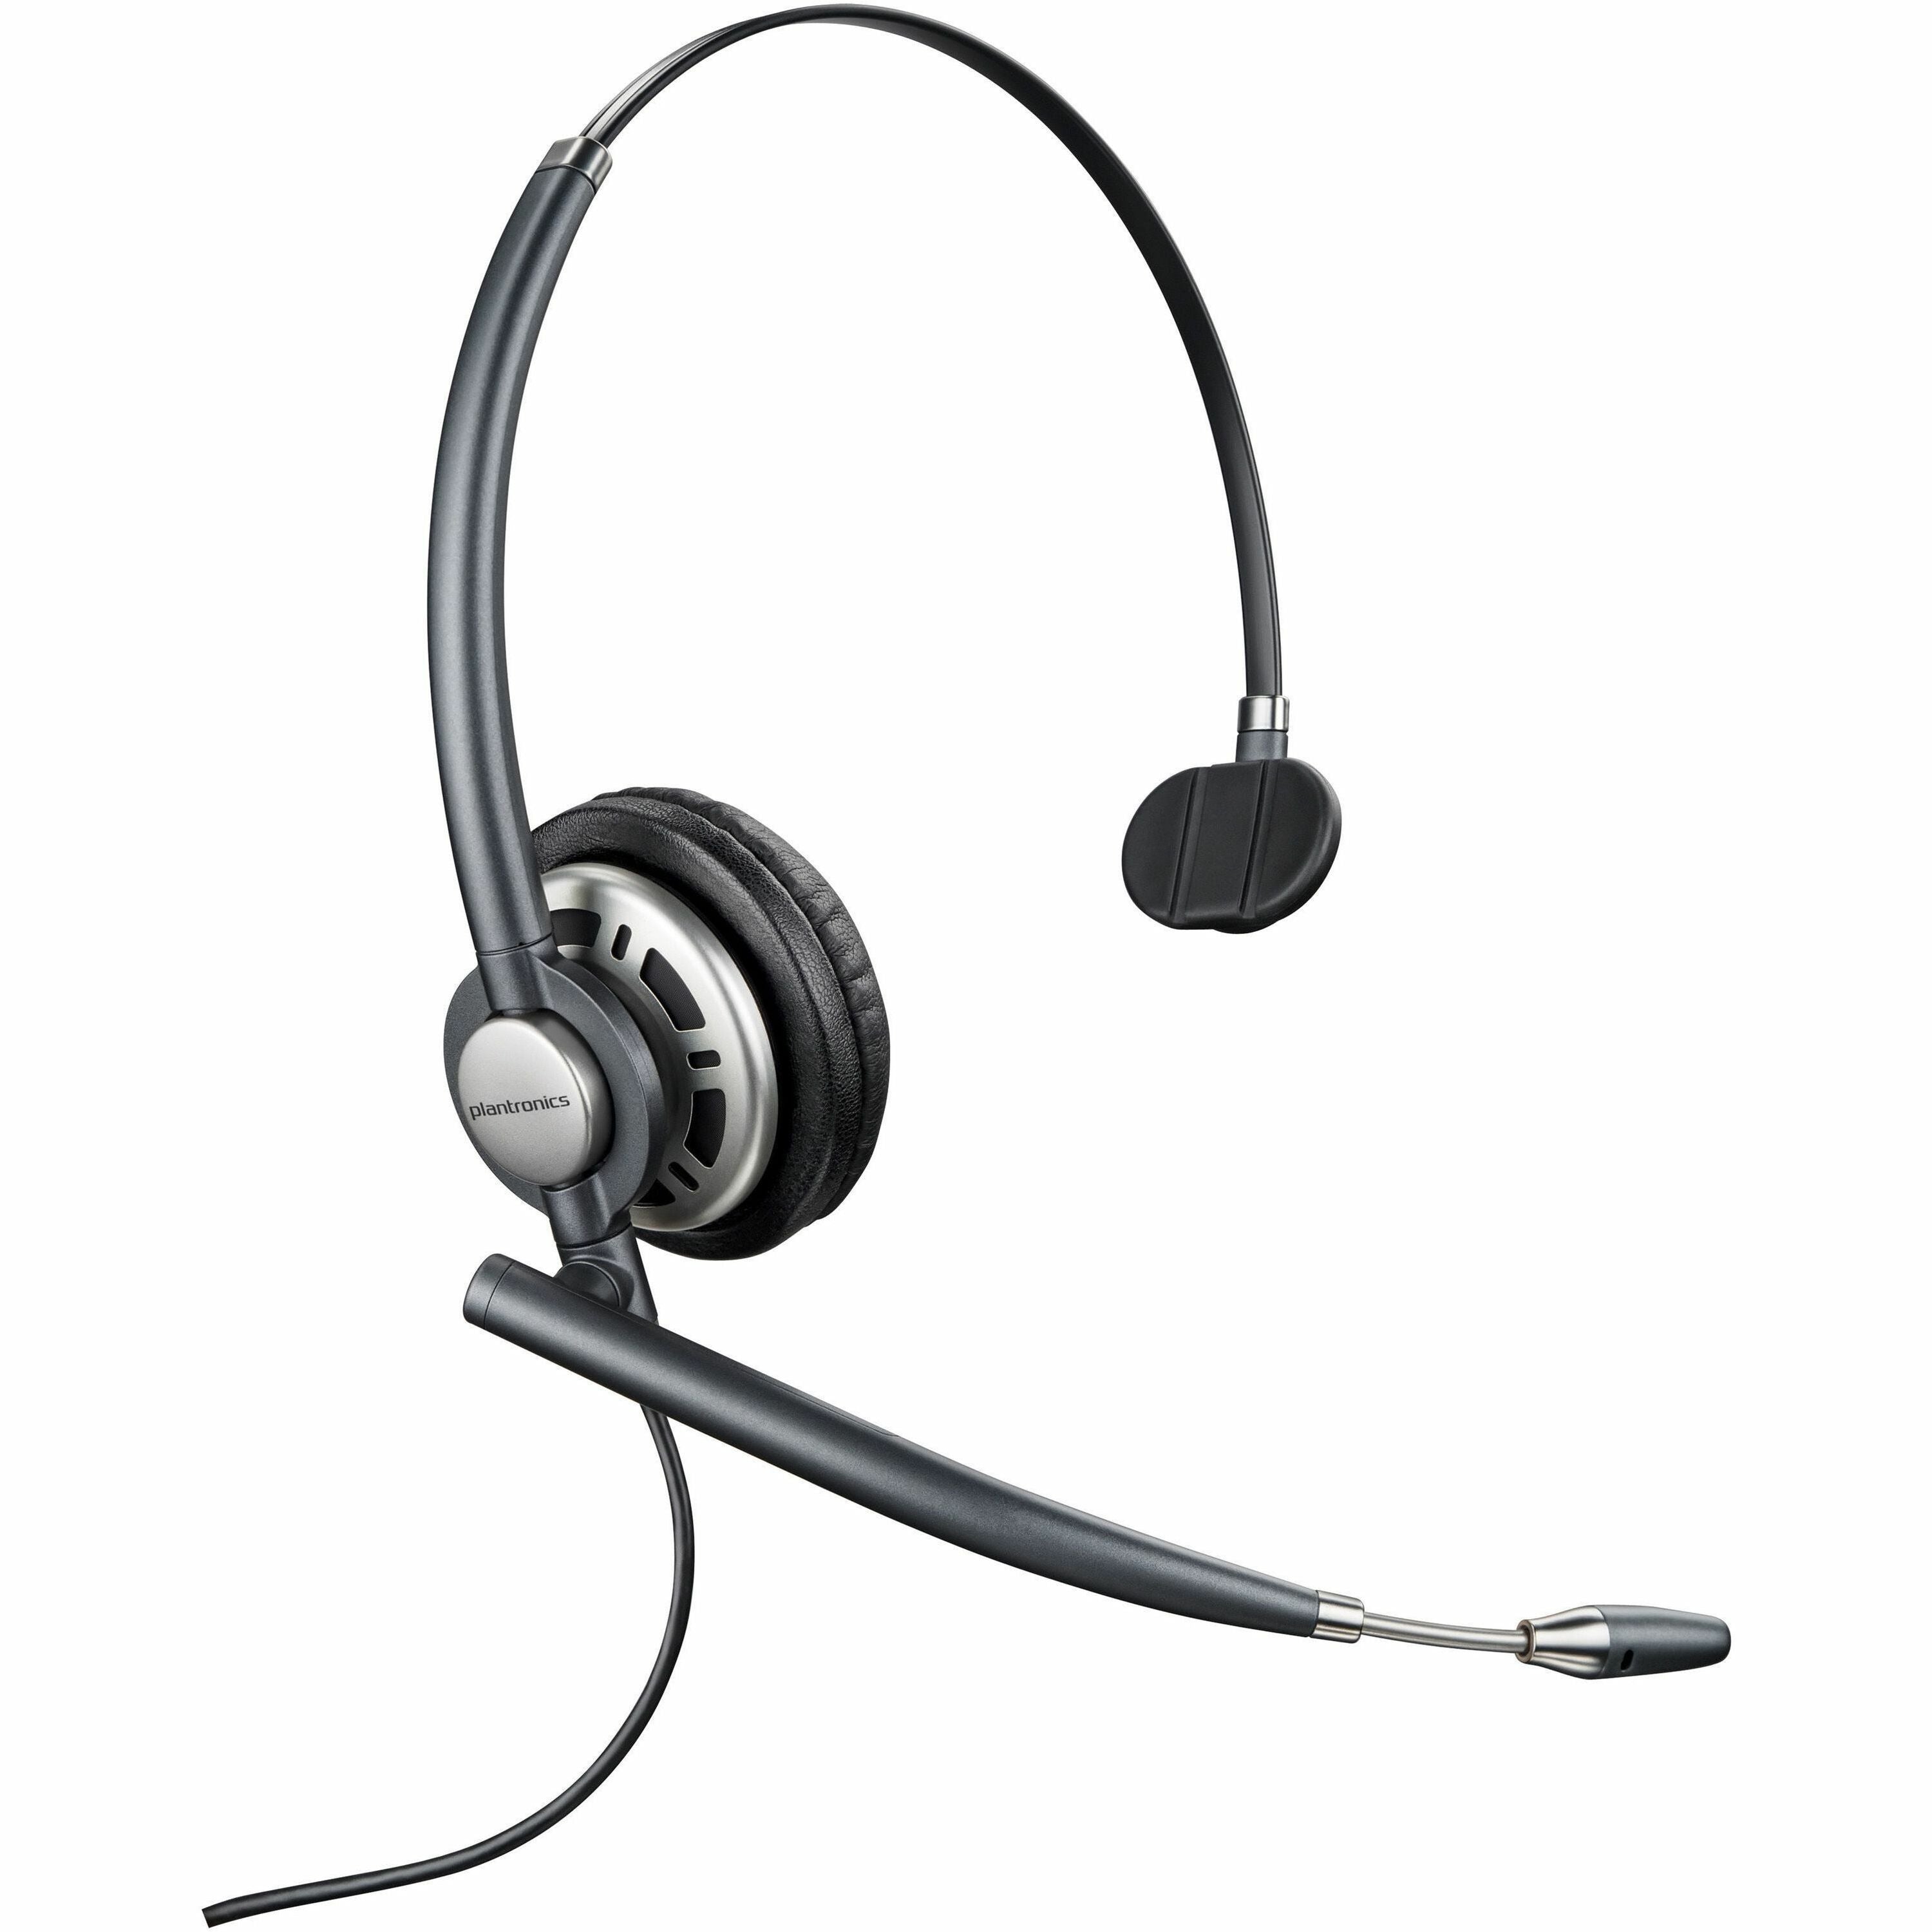 poly-encorepro-hw710-single-ear-headset-mono-usb-type-a-wired-80-hz-20-khz-over-the-ear-on-ear-monaural-ear-cup-292-ft-cable-noise-cancelling-omni-directional-microphone-noise-canceling-black-taa-compliant_hew805h7aa - 1